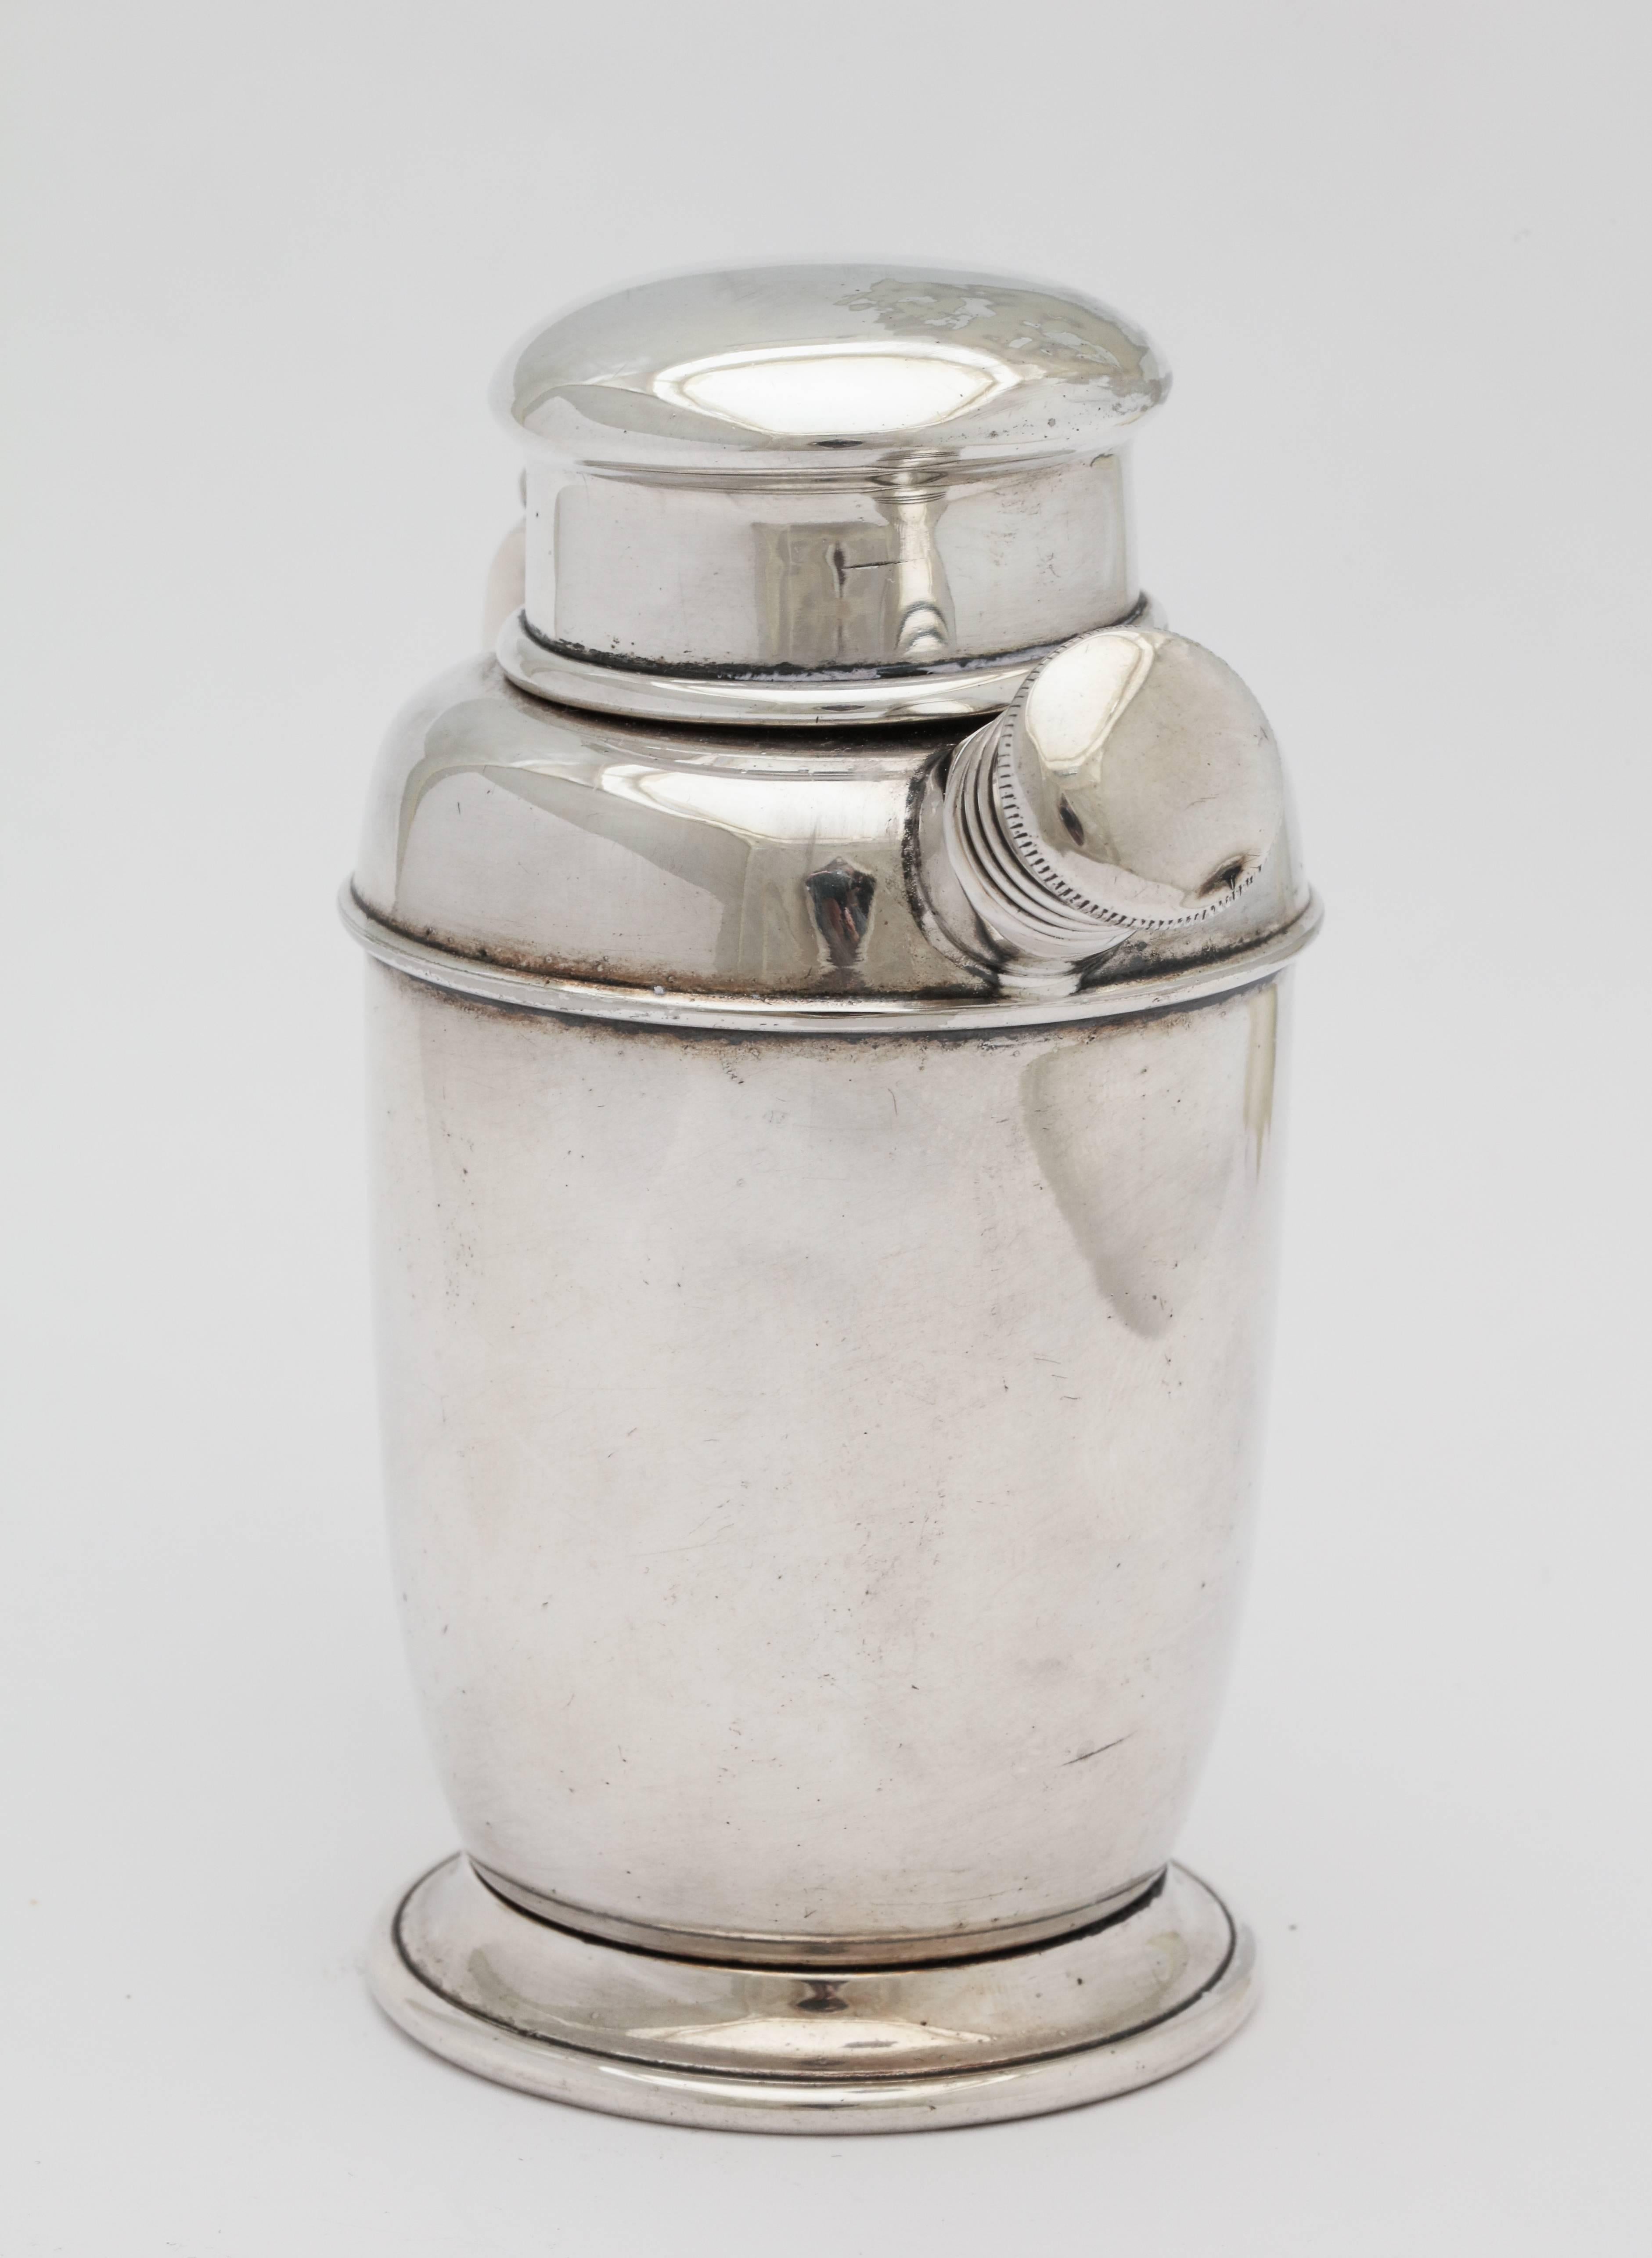 This collectible lighter is a charming conversation piece for any cocktail table or bar cart..
It is silver plate and requires flint and a wick, circa 1950s.